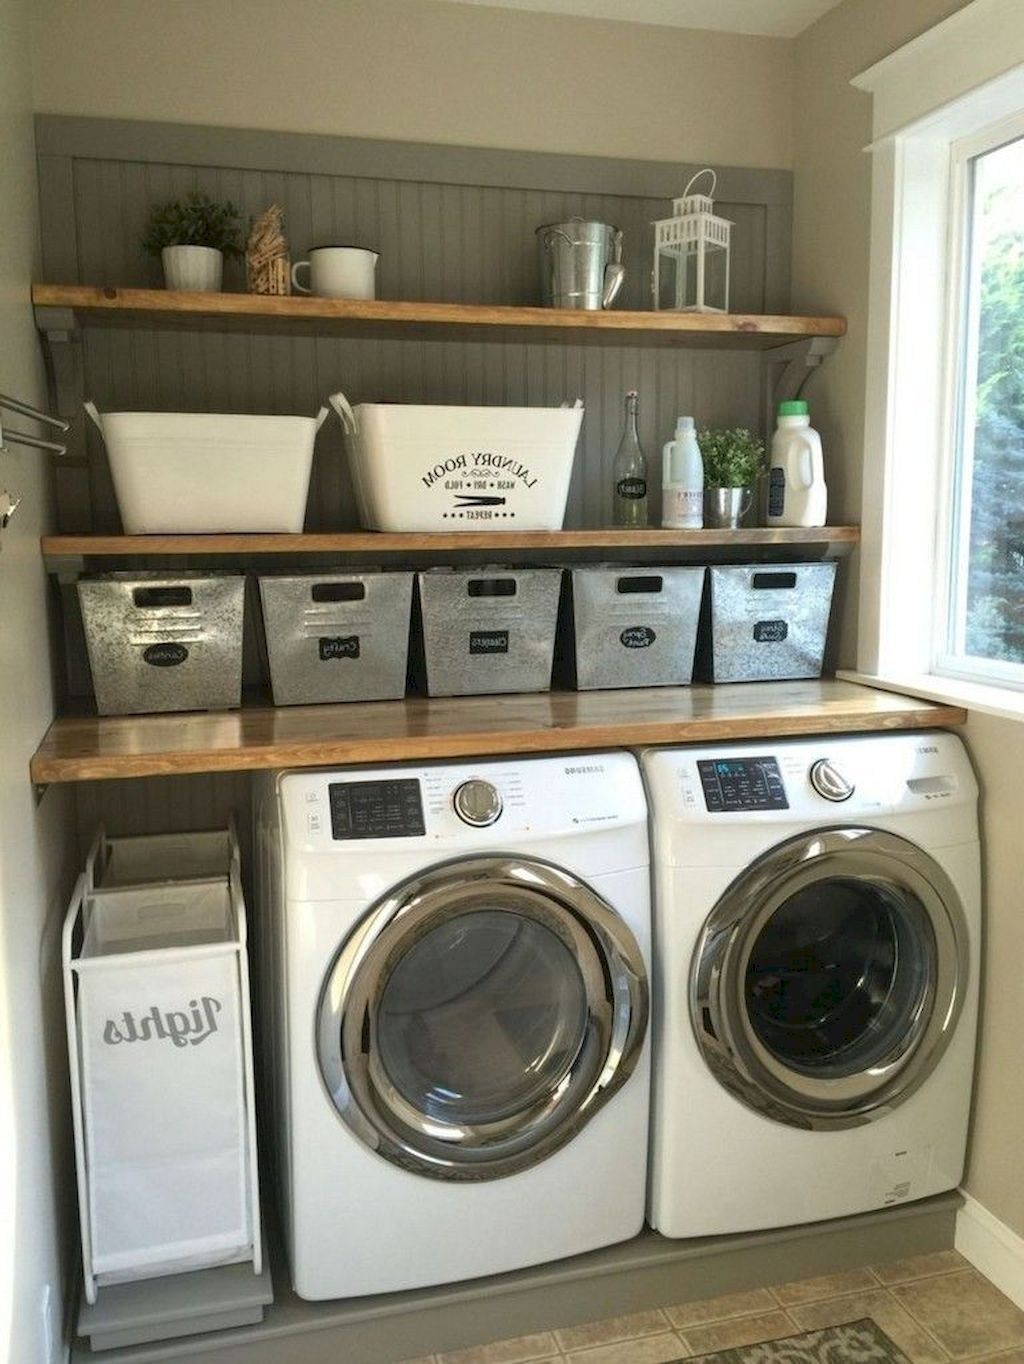 Favored Laundry Room Organization Ideas To Try 20